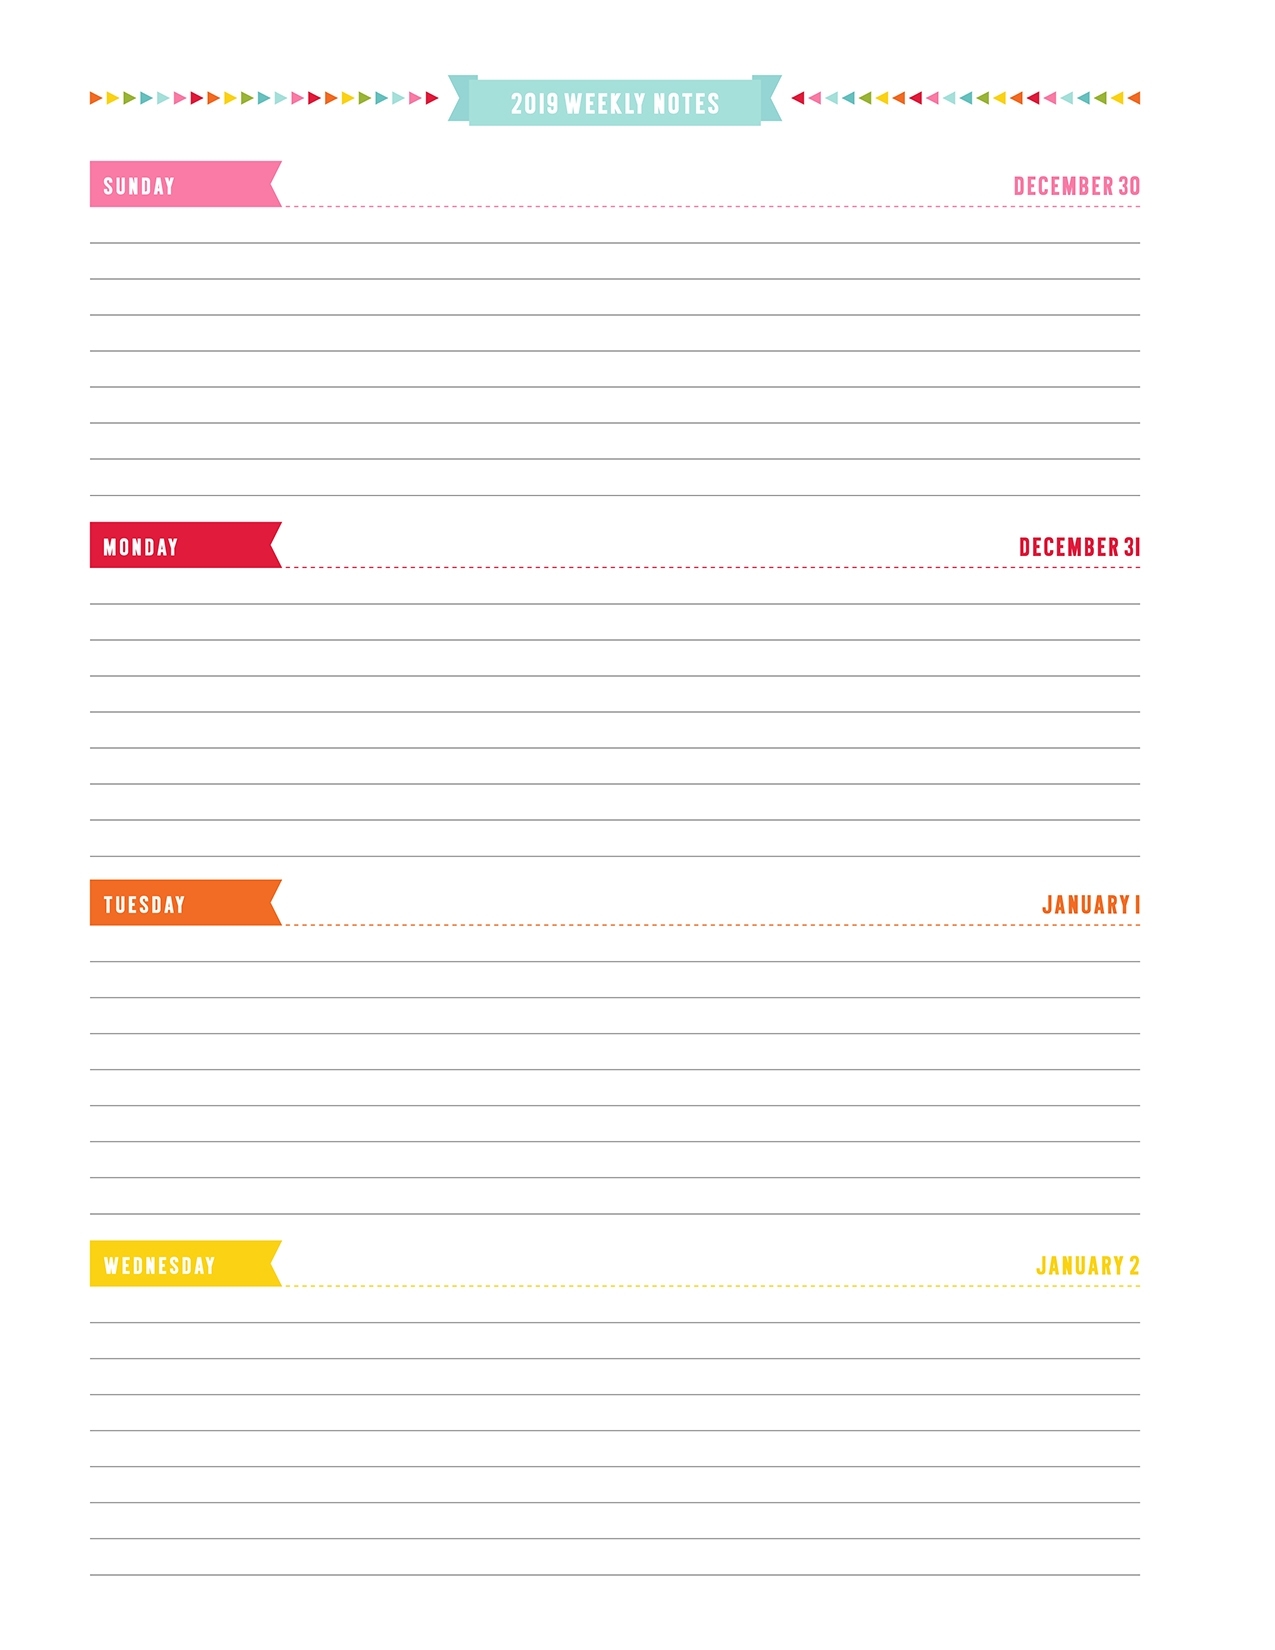 Weekly Schedule With Blank Time Slots Calendar Inspiration Design